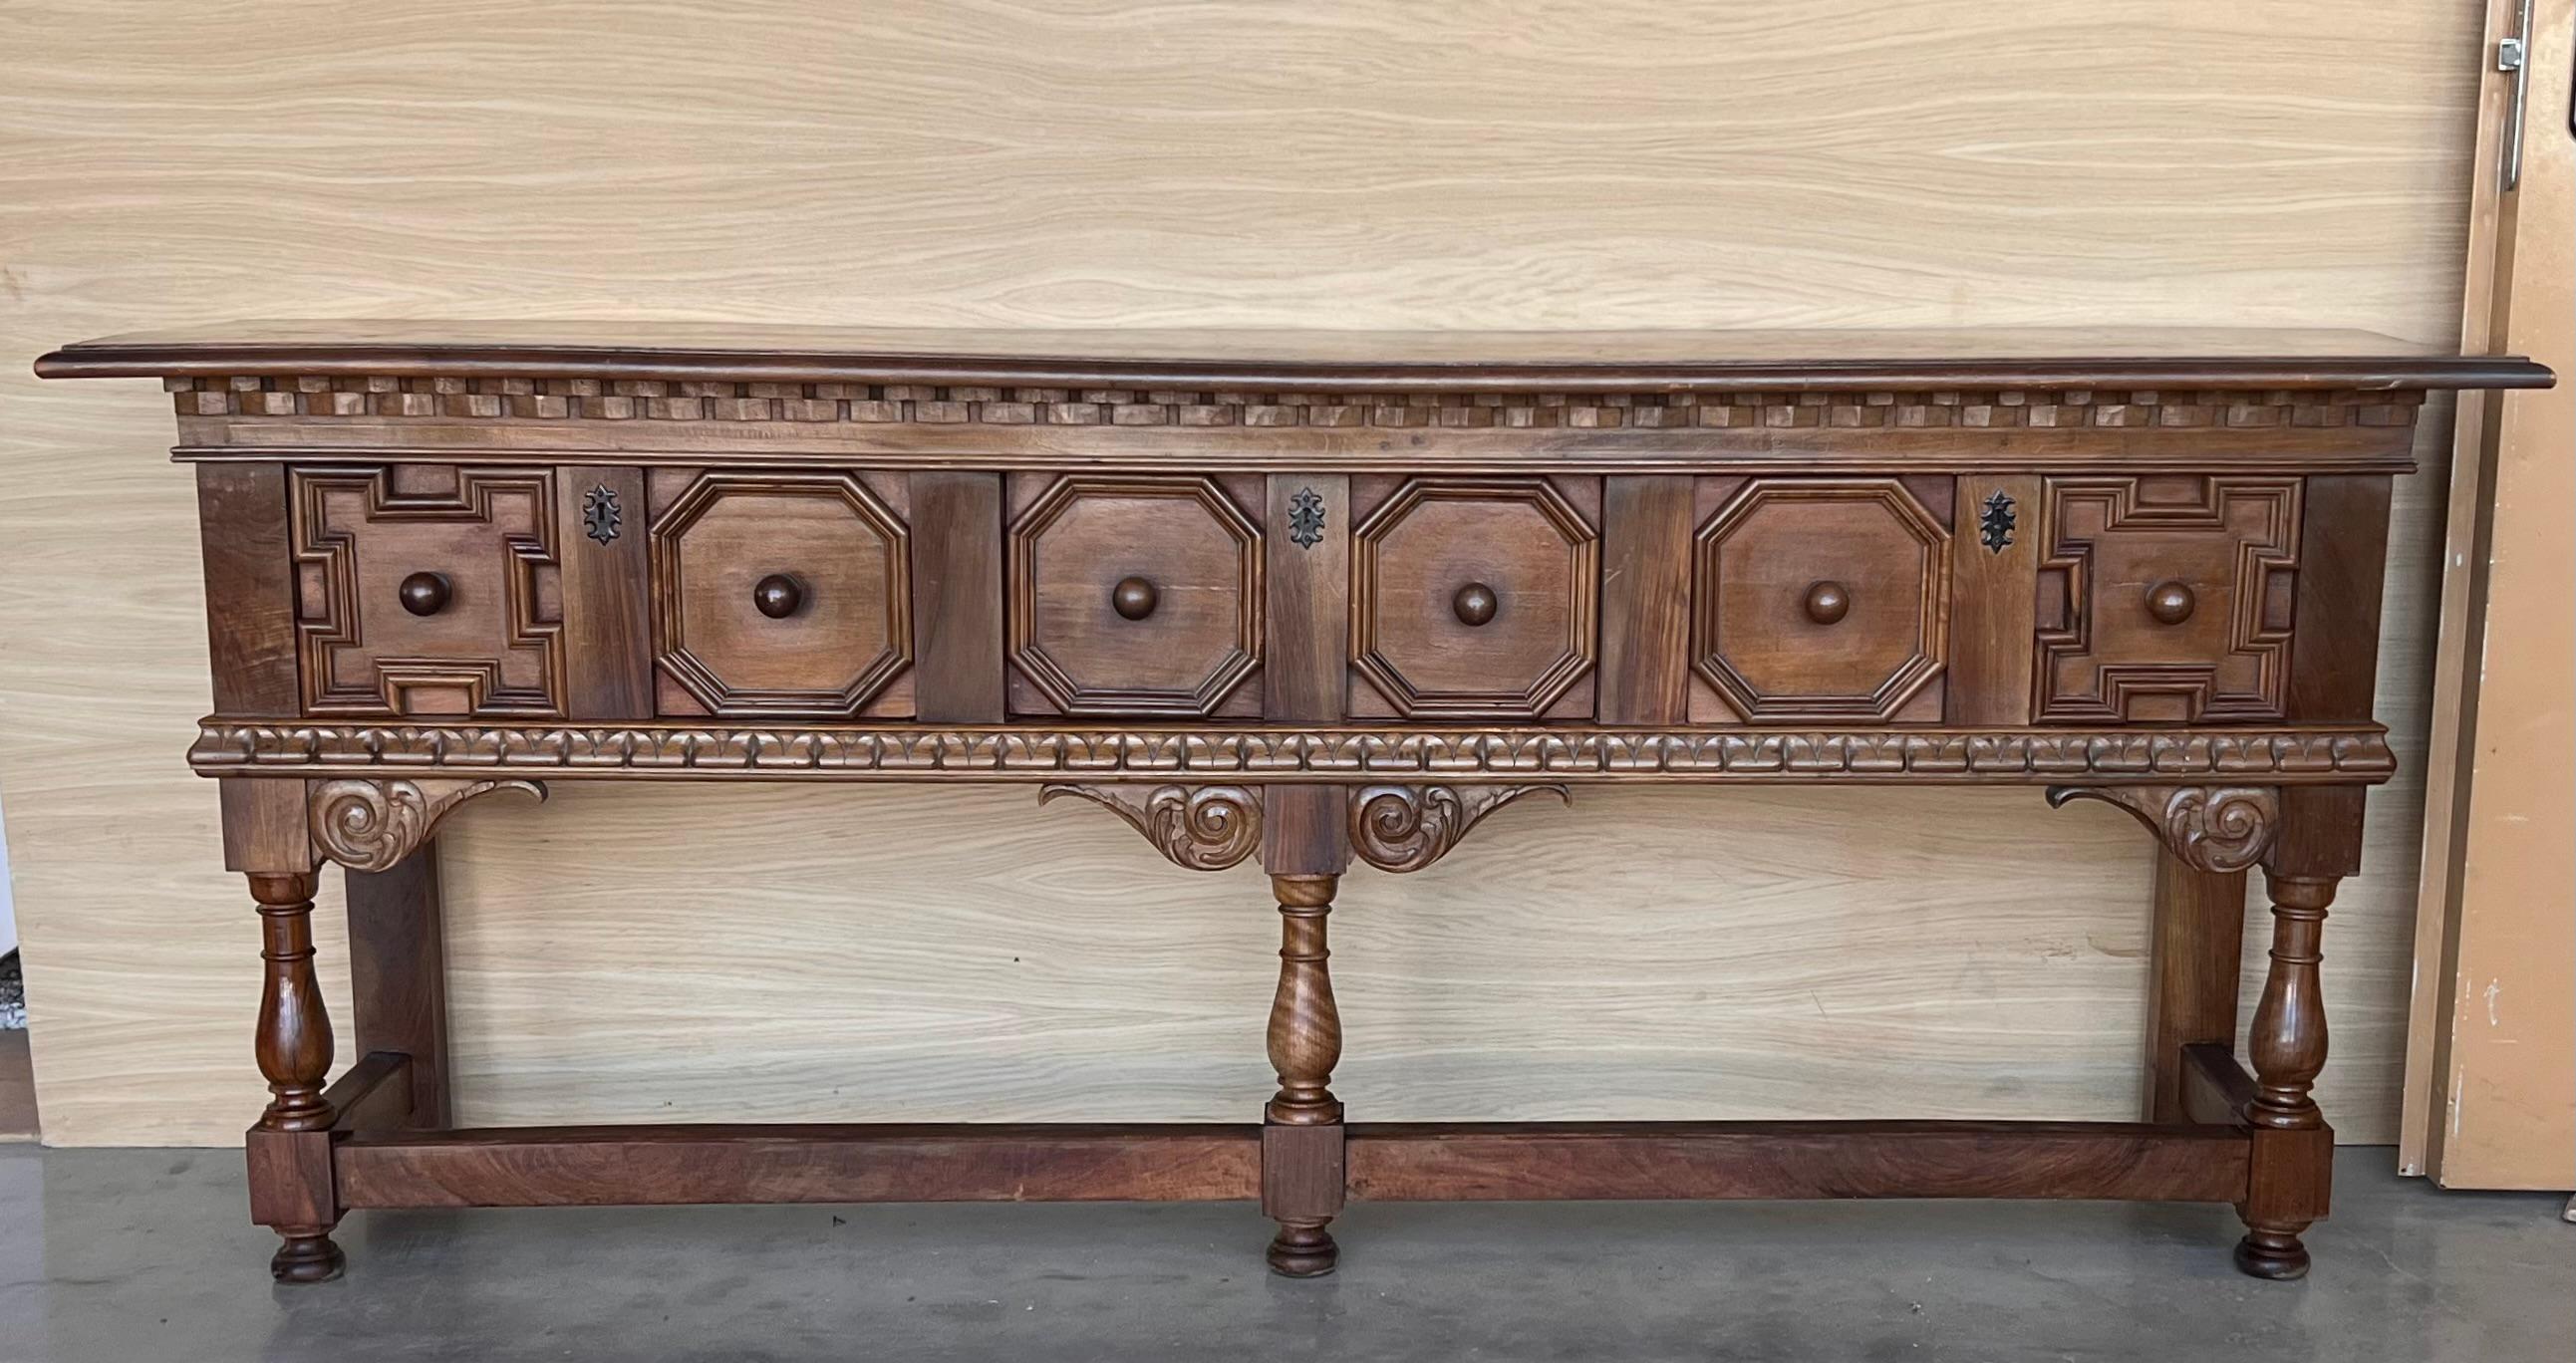 Unique piece 20th century Spanish refectory table with carved drawers and moldings. Two iron pulls in each drawer

Completely restored.

